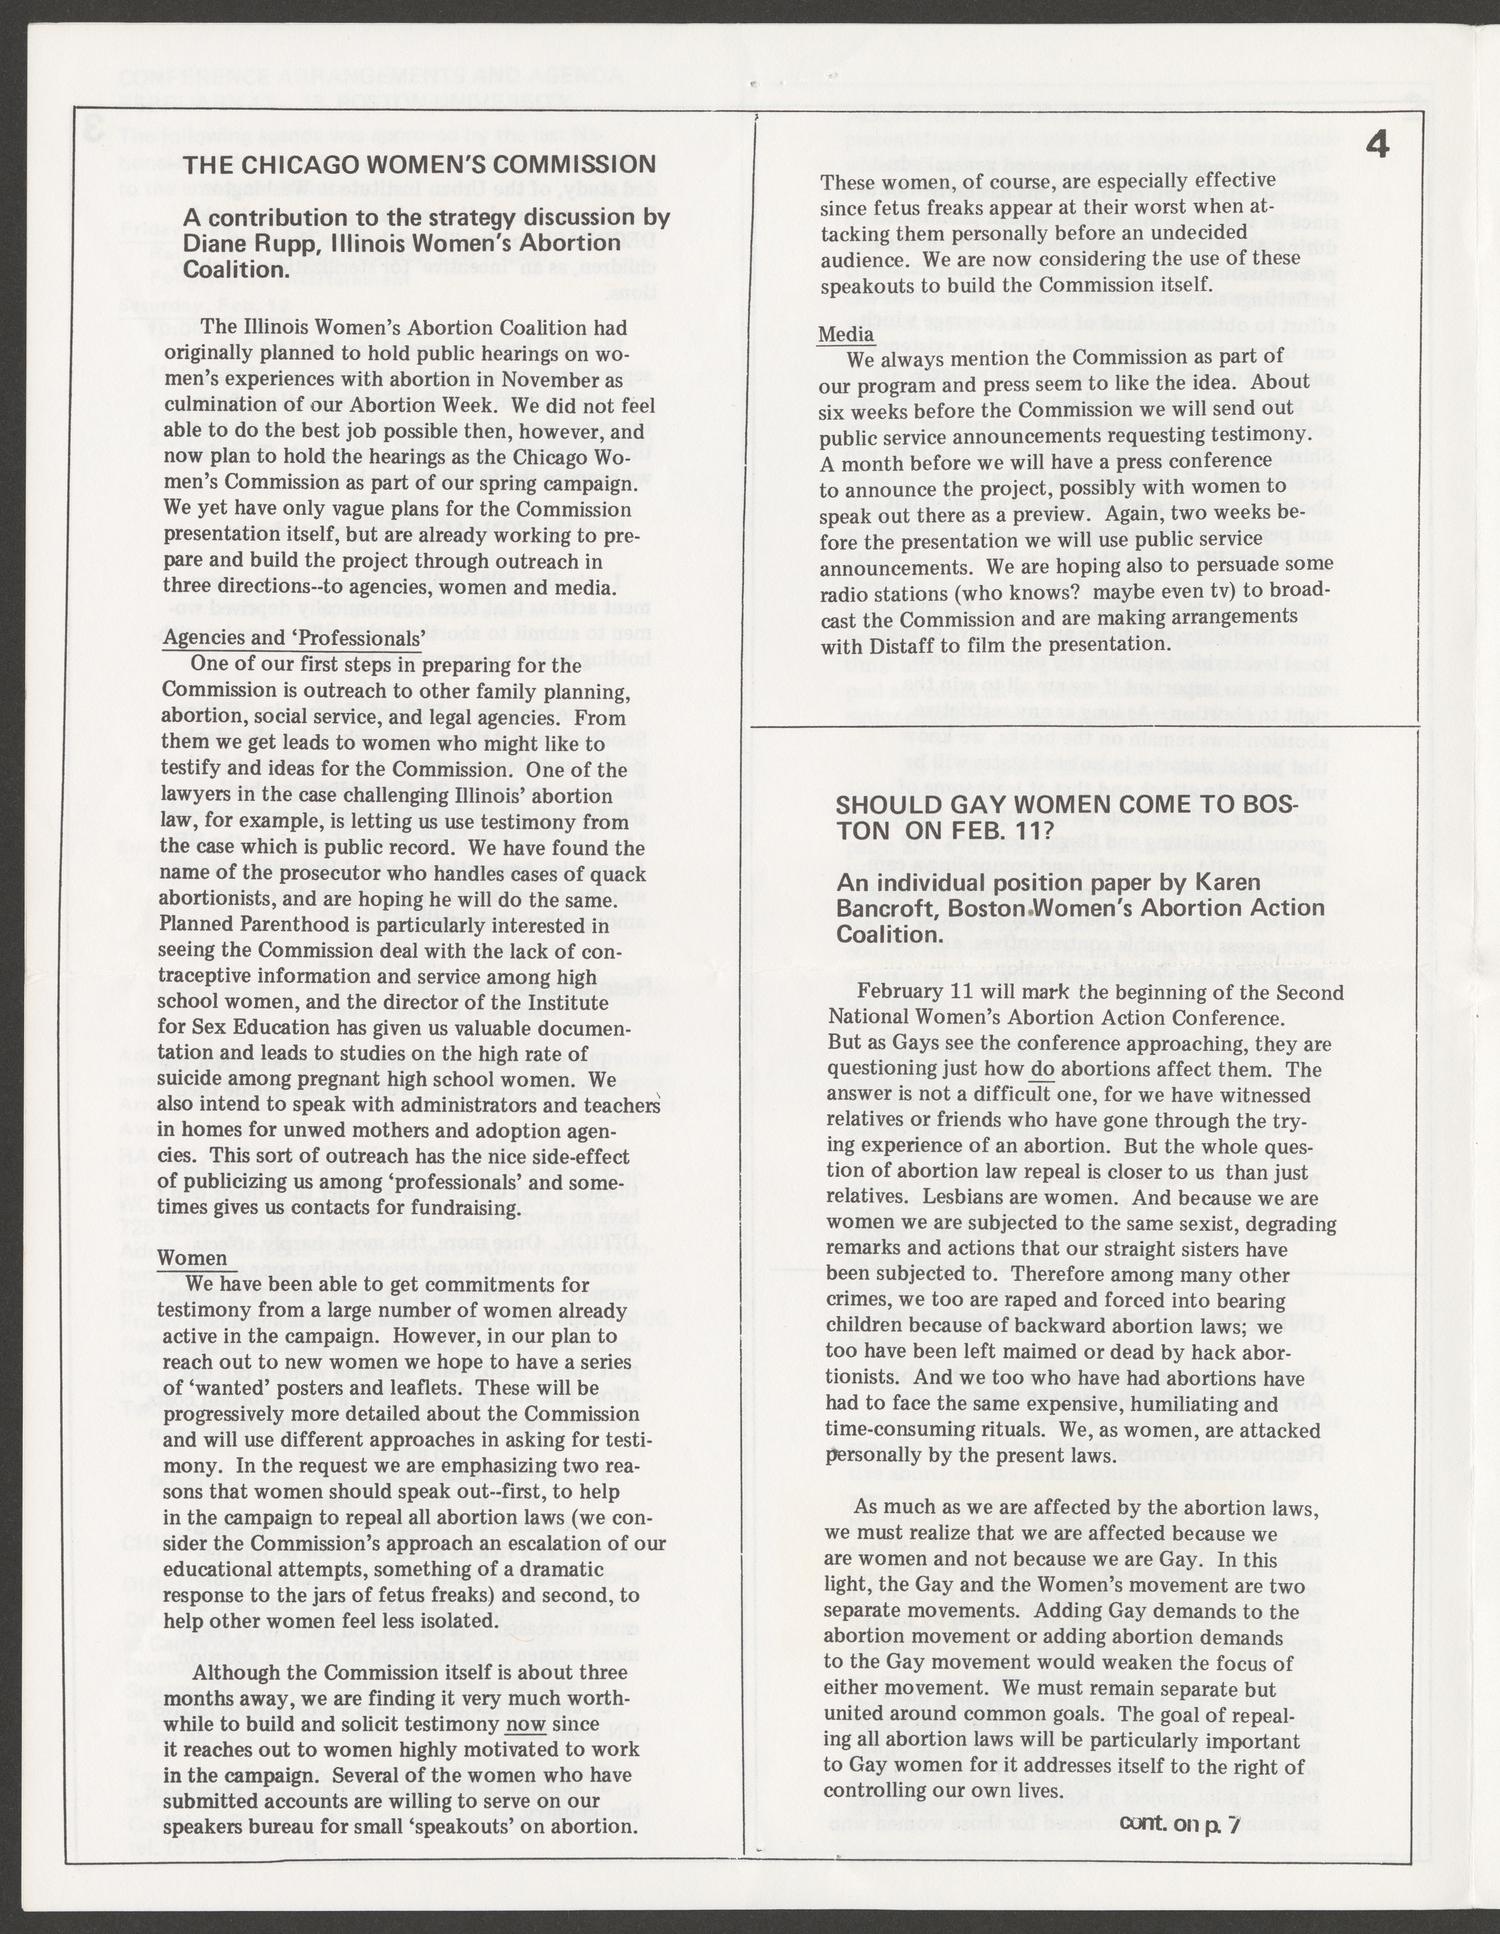 Woman's National Abortion Action Coalition (WONAAC) Newsletter, 1972-01-31
                                                
                                                    [Sequence #]: 4 of 8
                                                